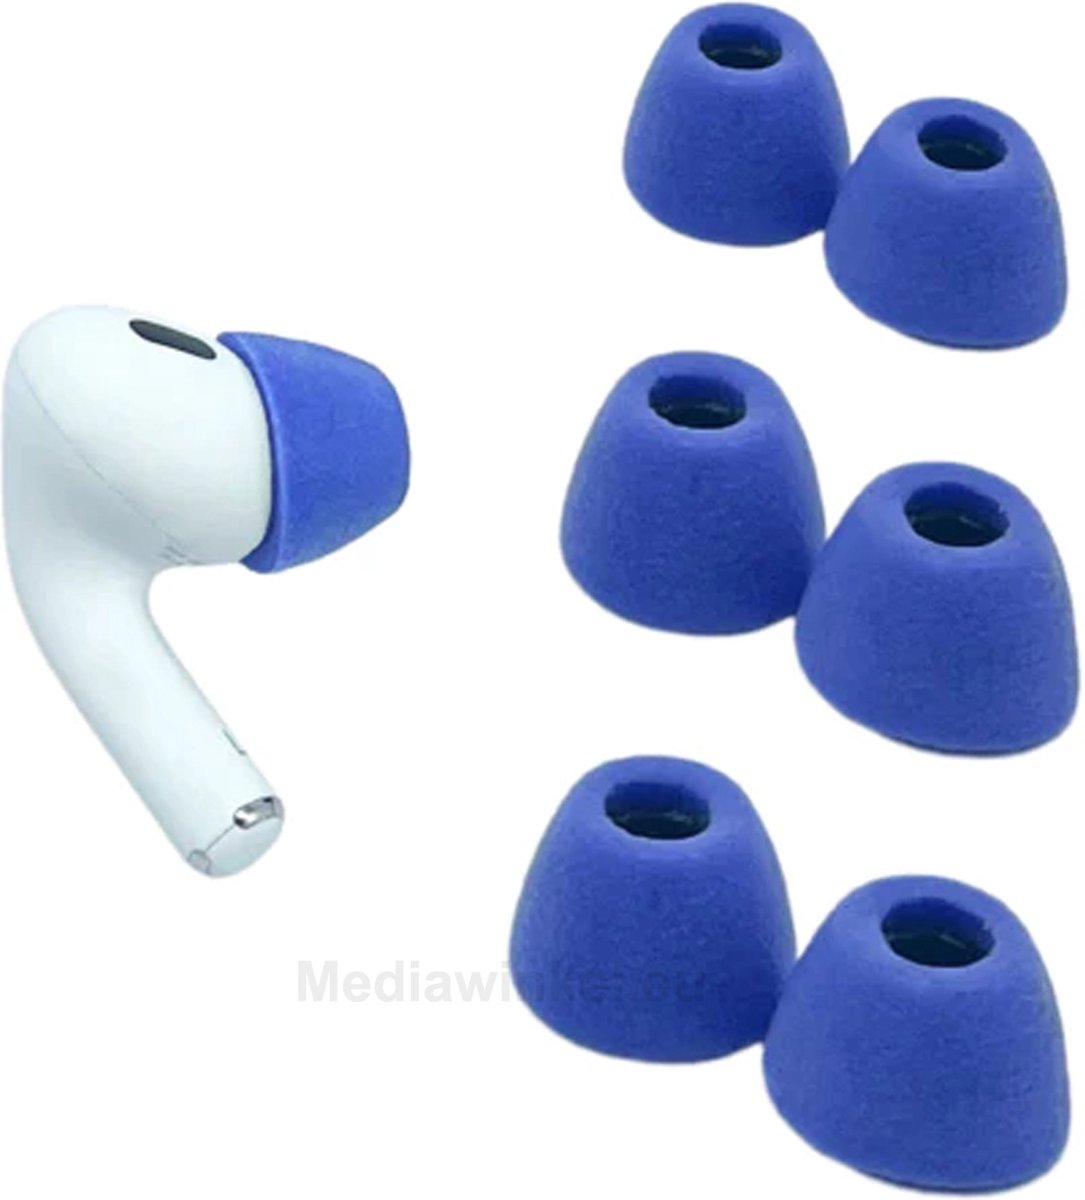 Comply Foam Tips 2.0 voor AirPods Pro, size: mixed size, Electrice Blue